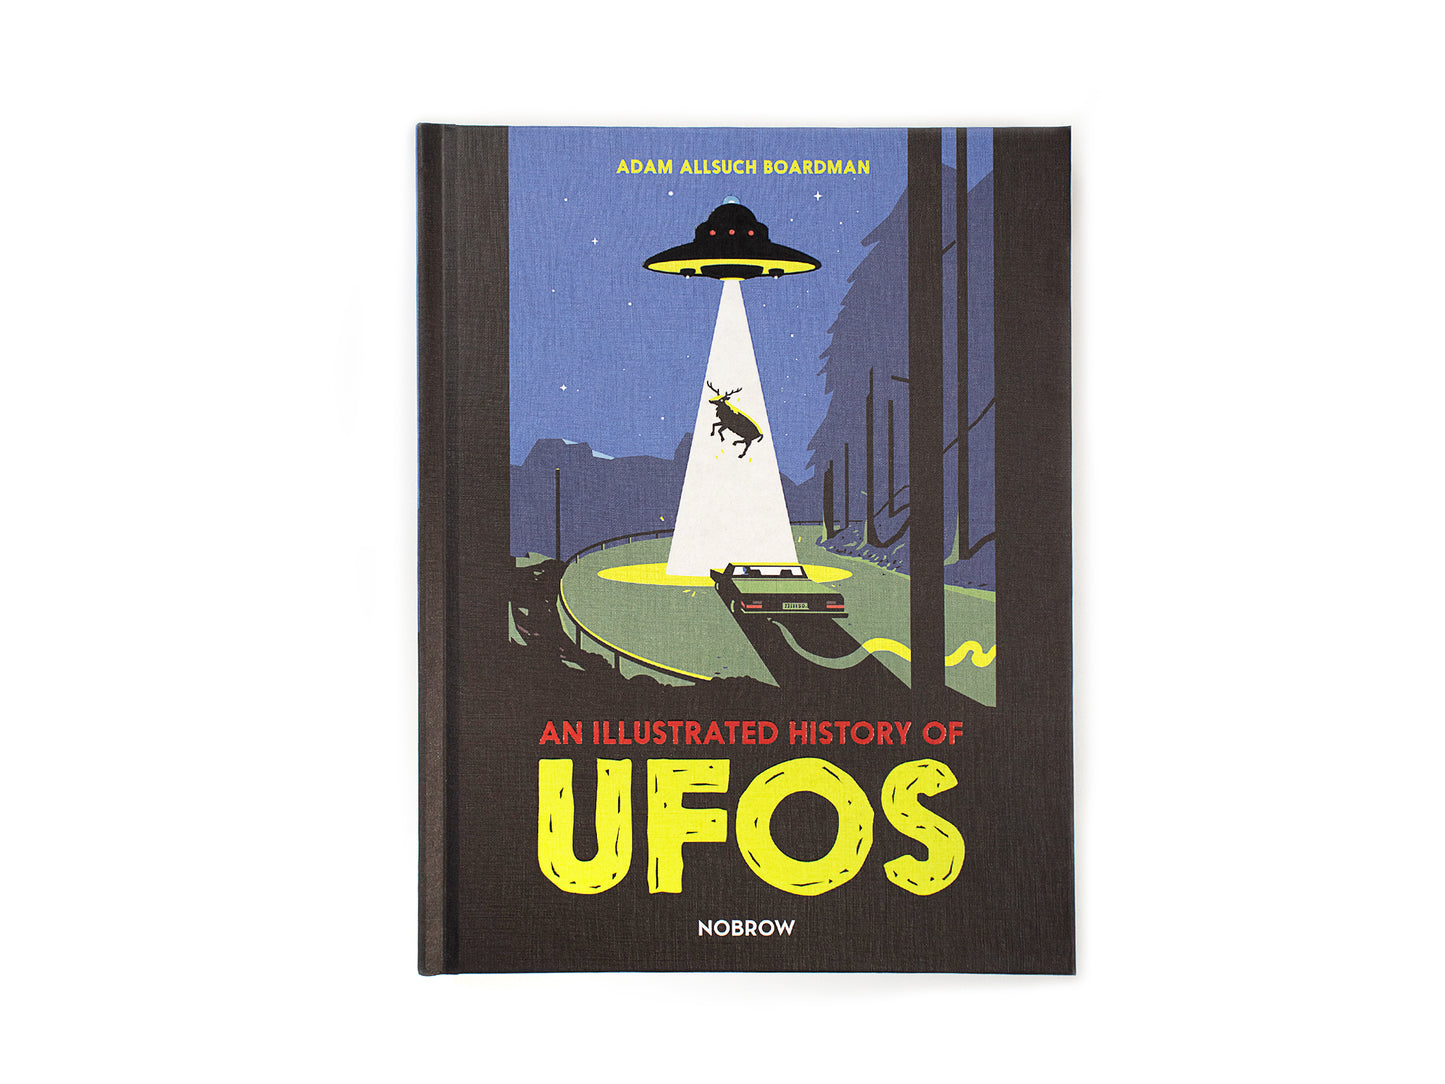 An Illustrated History of UFOs